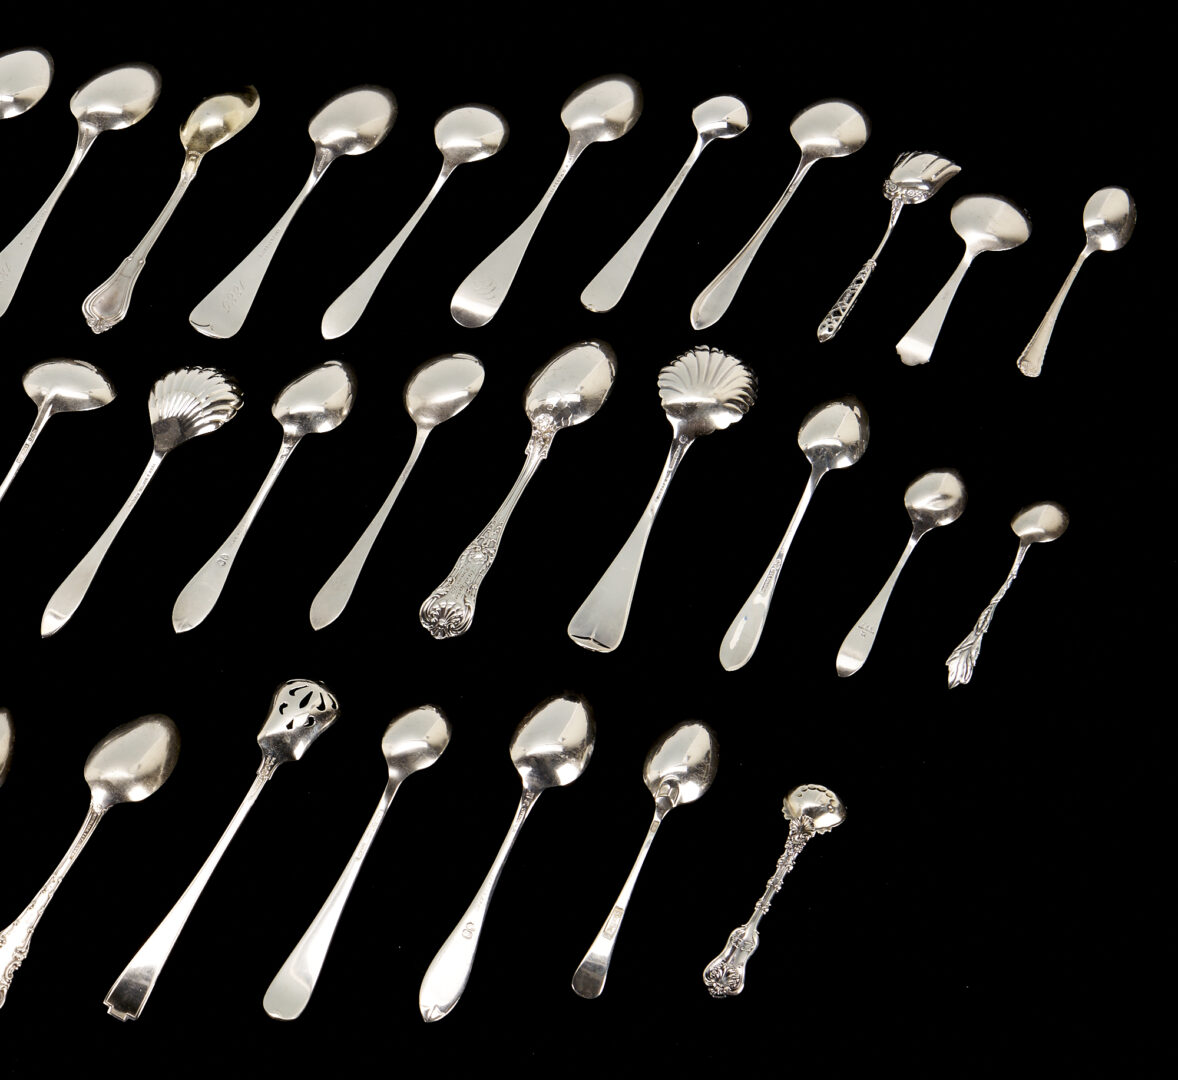 Lot 295: 87 Assorted Sterling Silver Flatware Items